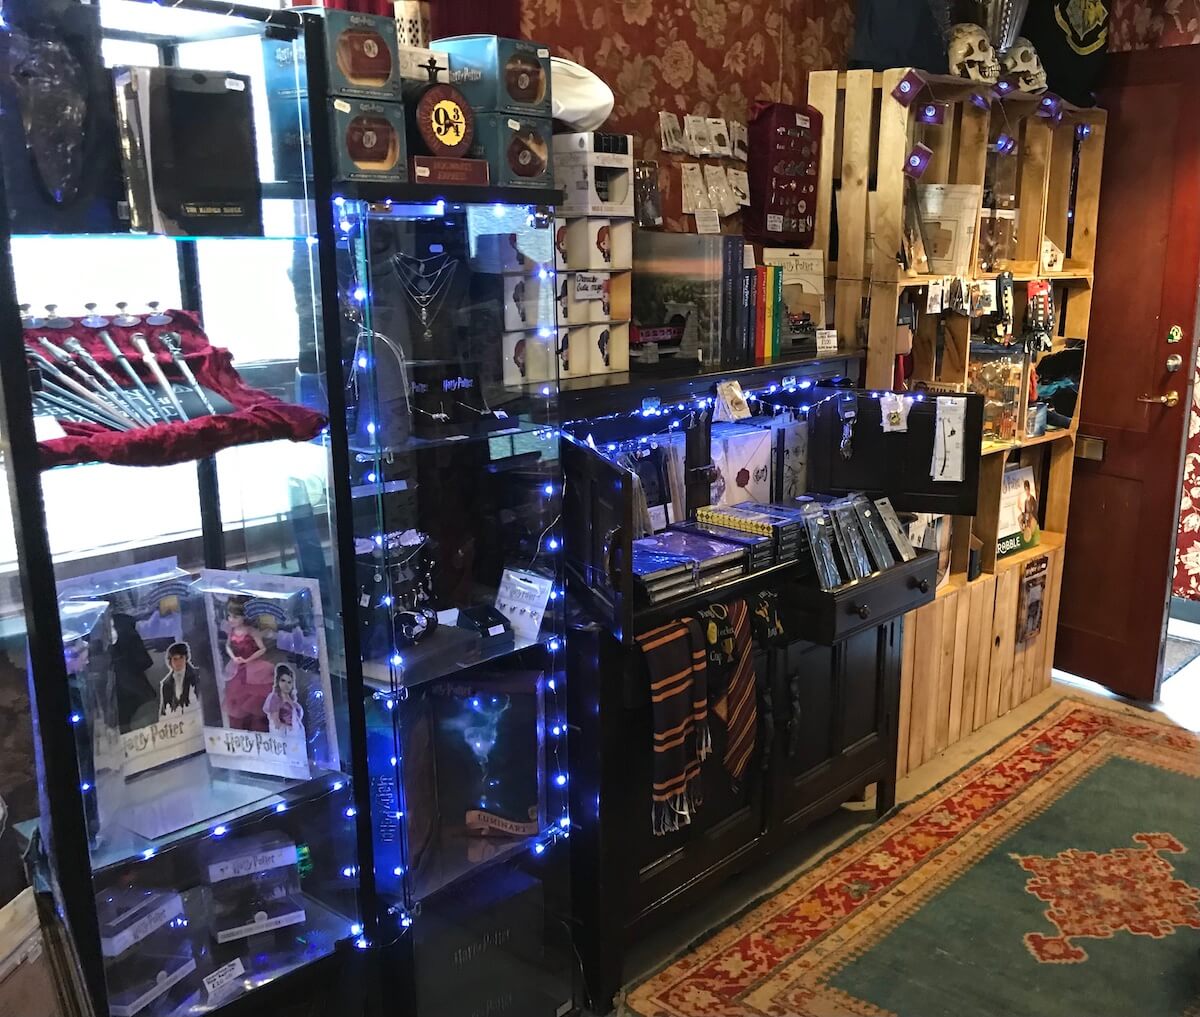 Shelves stocking a variety of Harry potter merchandise